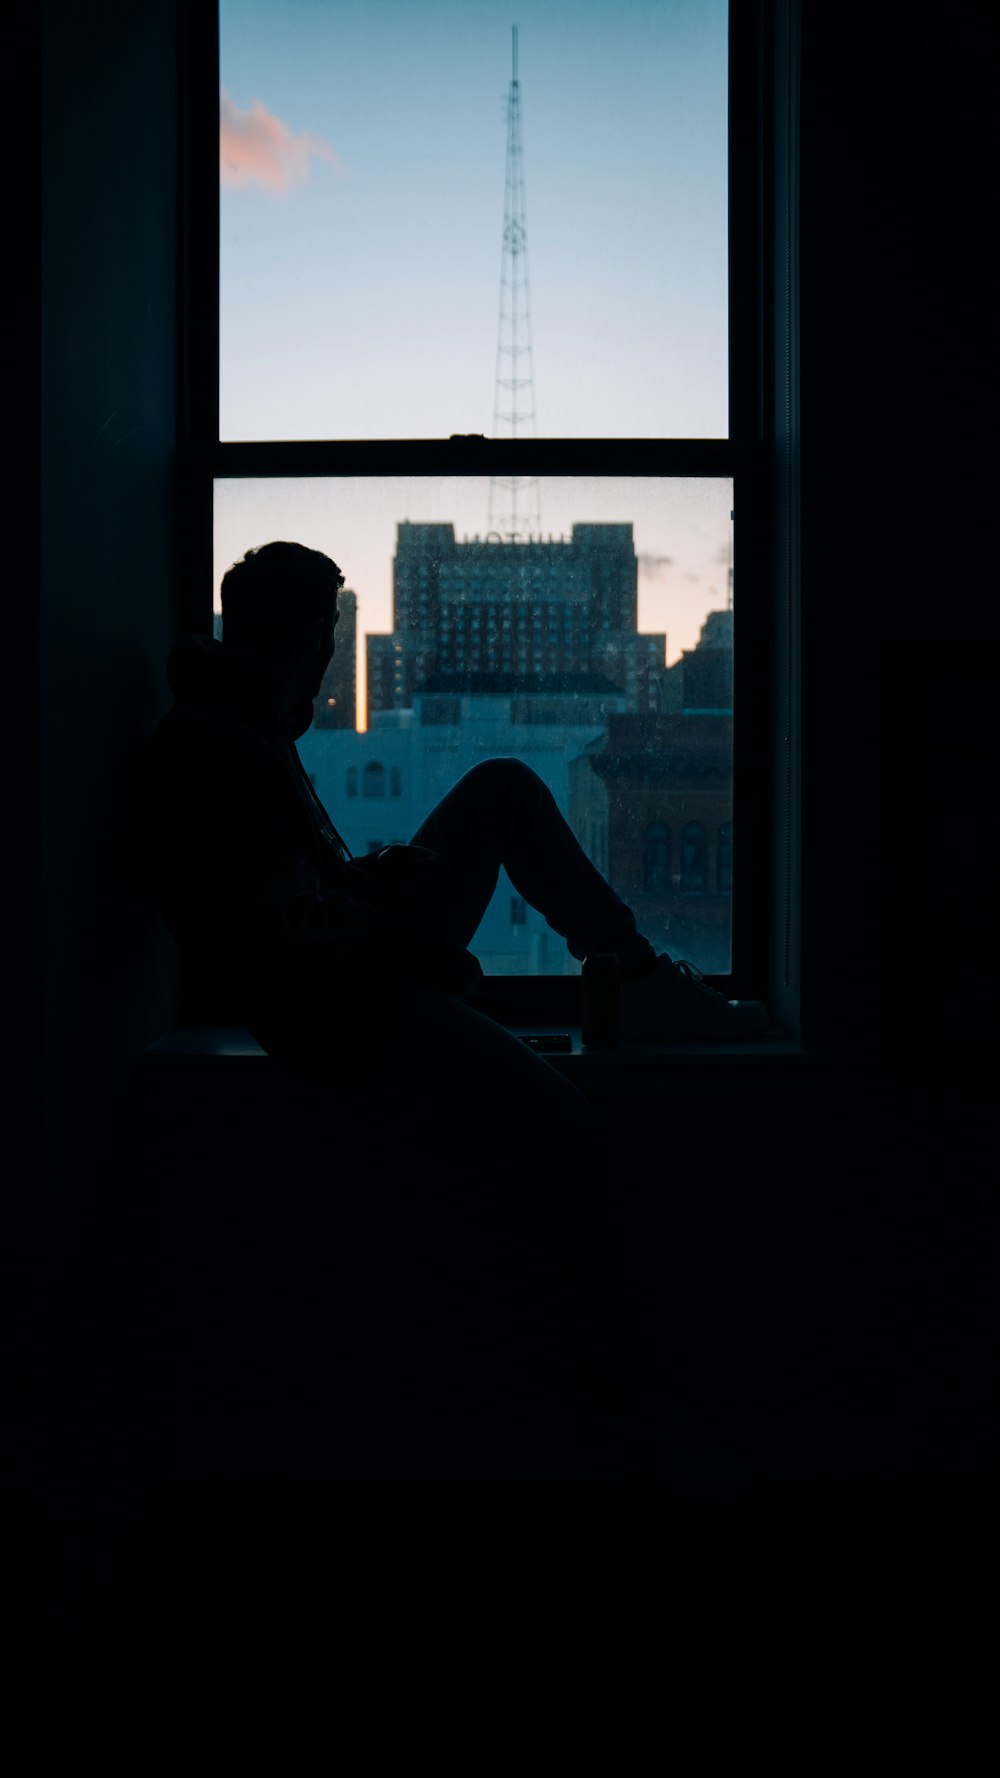 HD wallpaper: Man sitting on a window sill, looking out at night